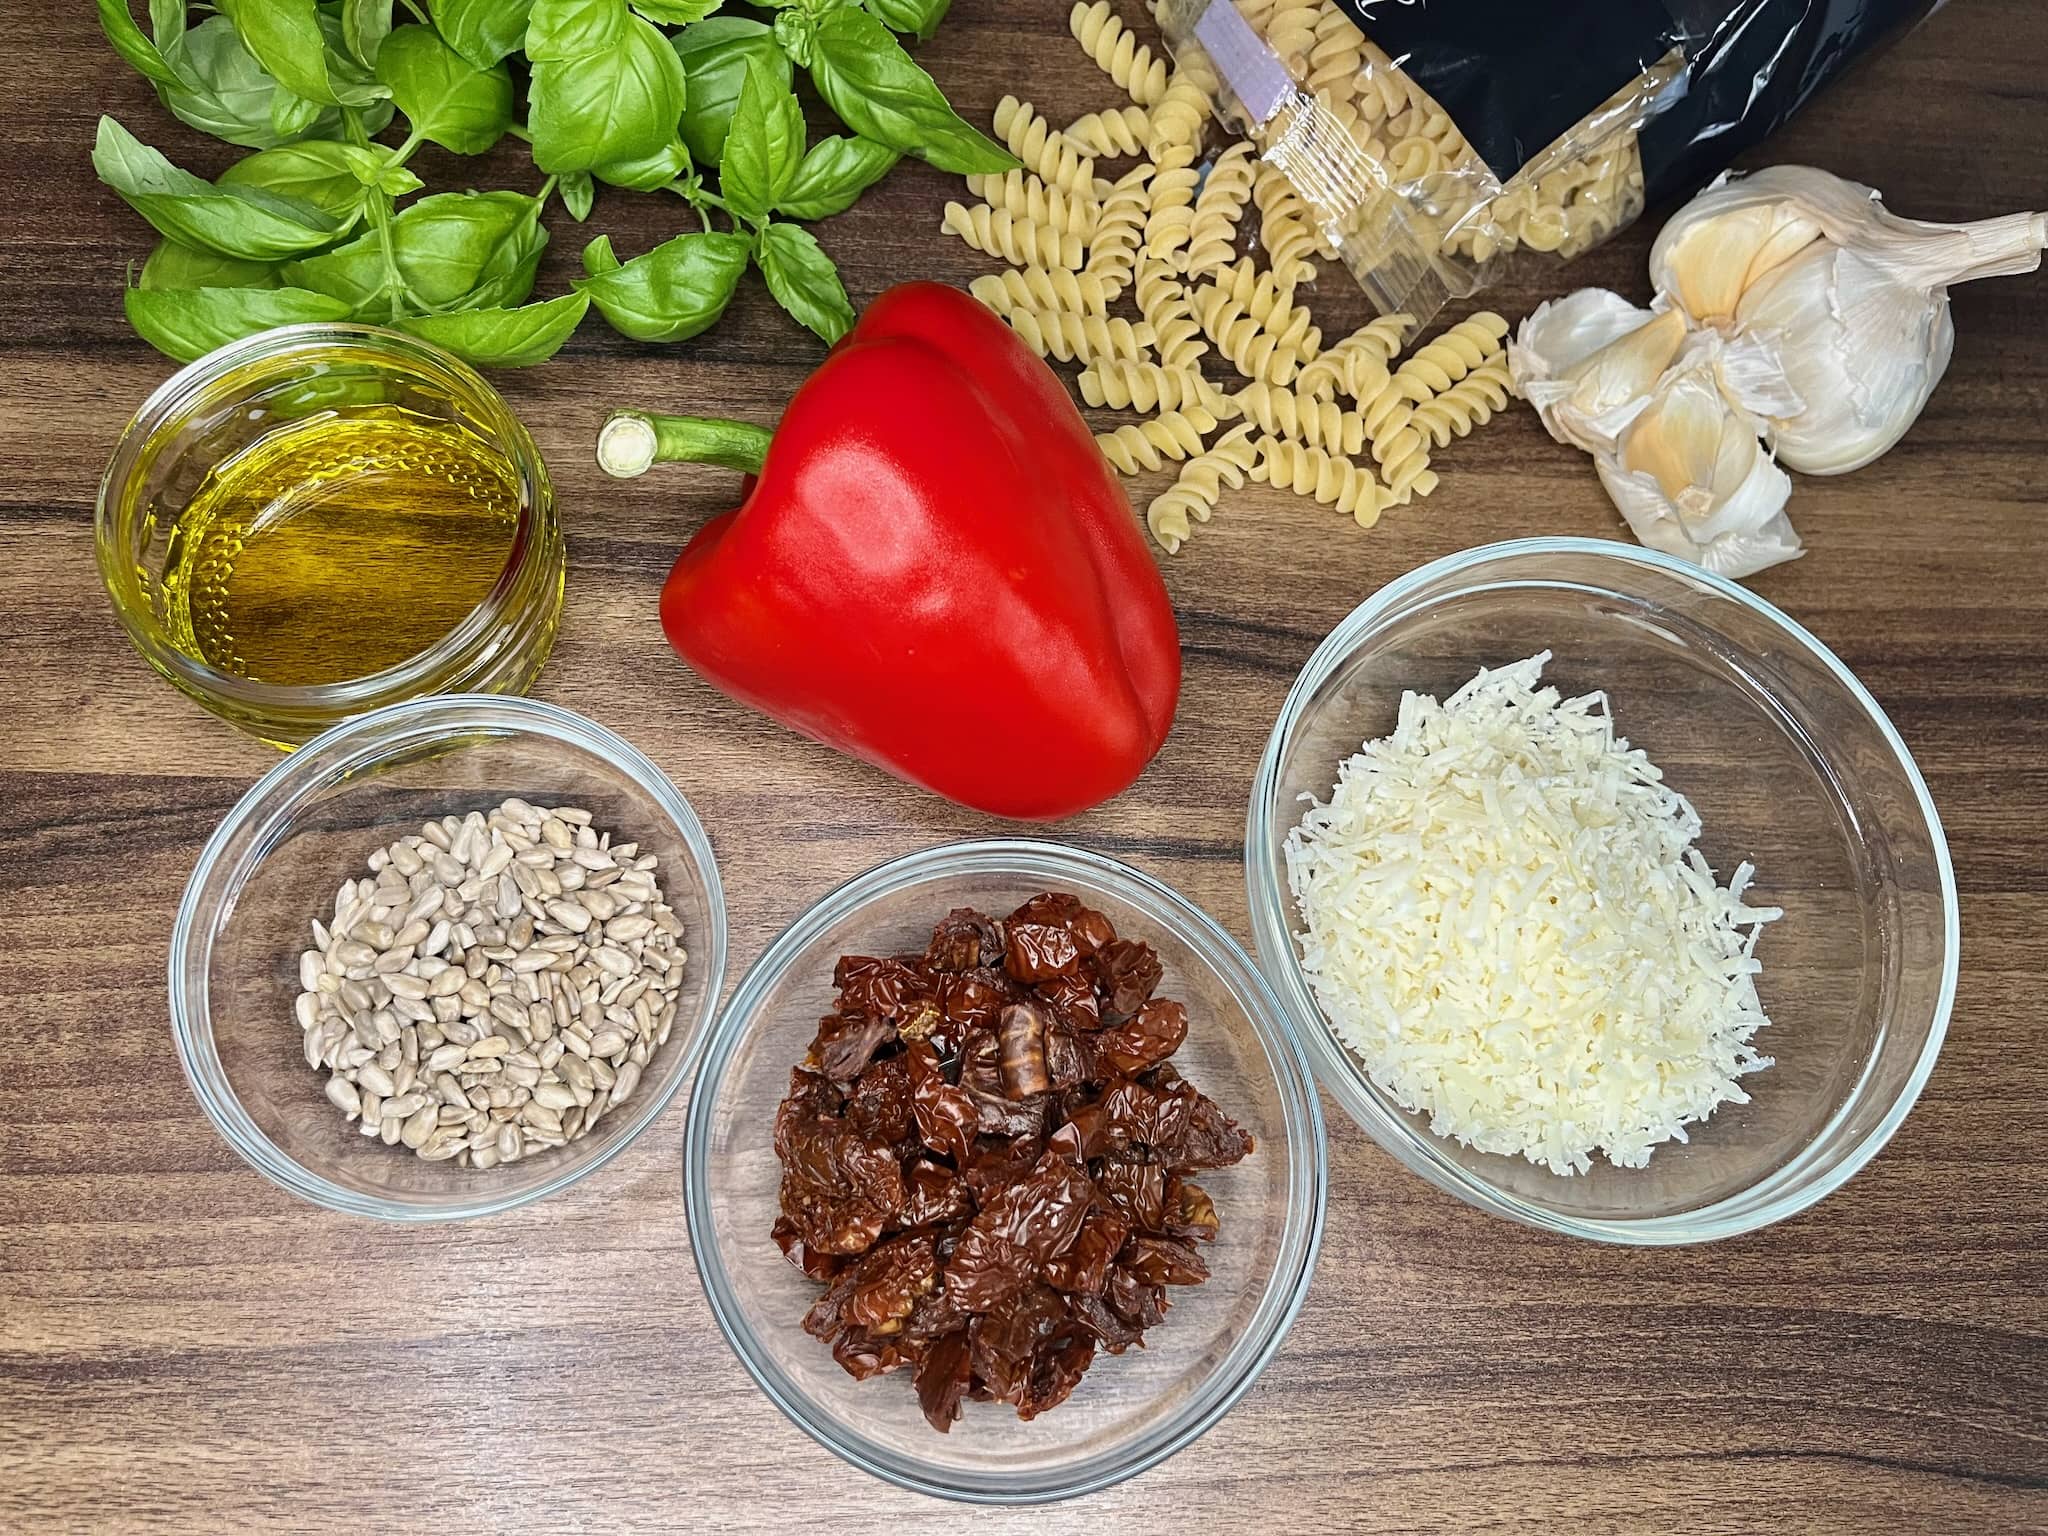 All of the ingredients for red pesto are laid out on the table, ready to be made